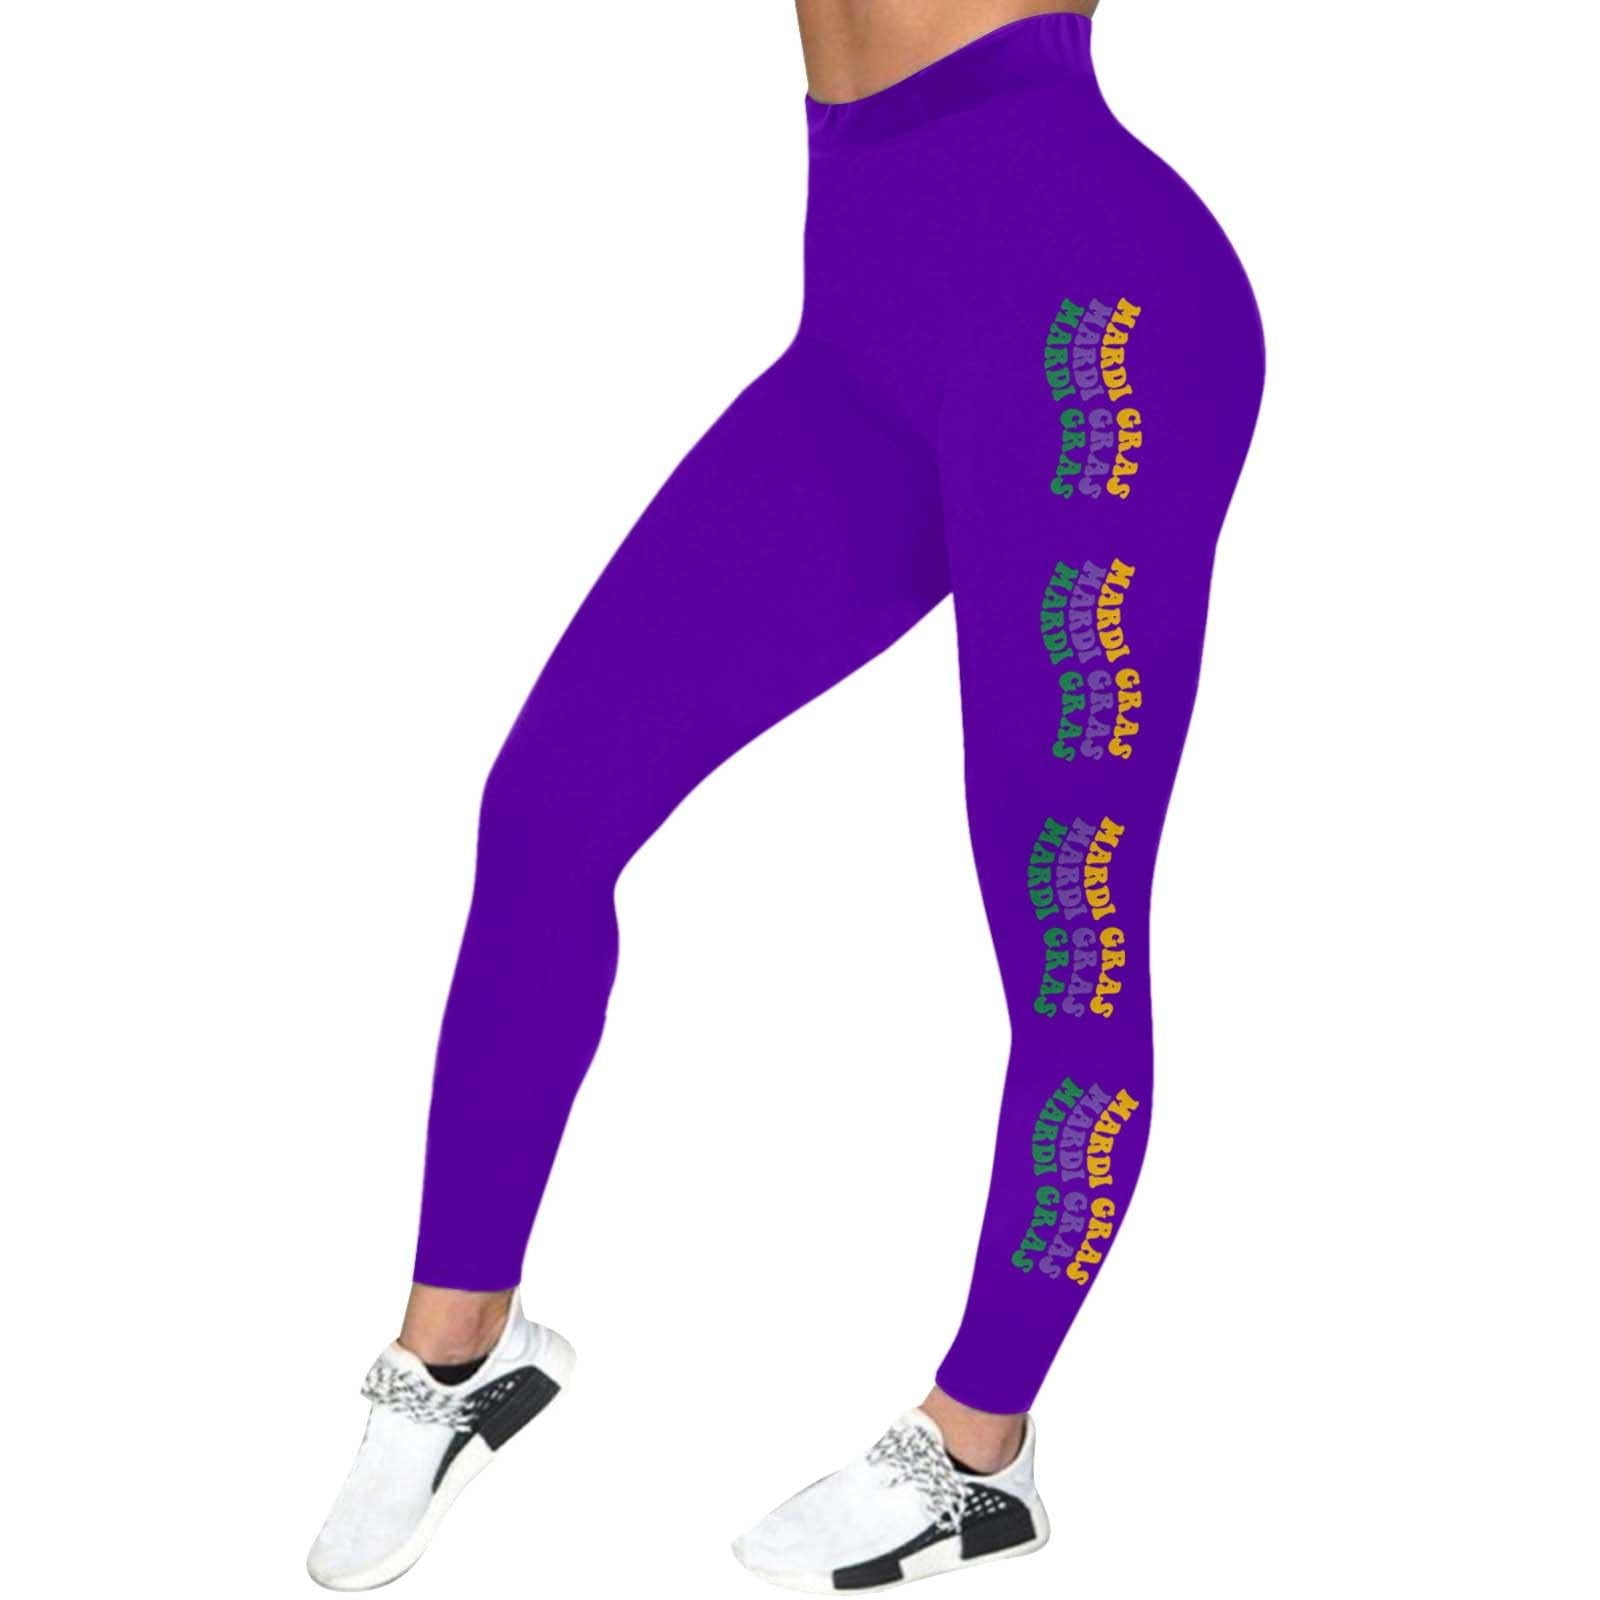 TQWQT Mardi Gras Leggings for Women Color Block Graphic High Waisted  Stretchy Carnival Printed Festival Party Parade Yoga Pants Purple XXXXL